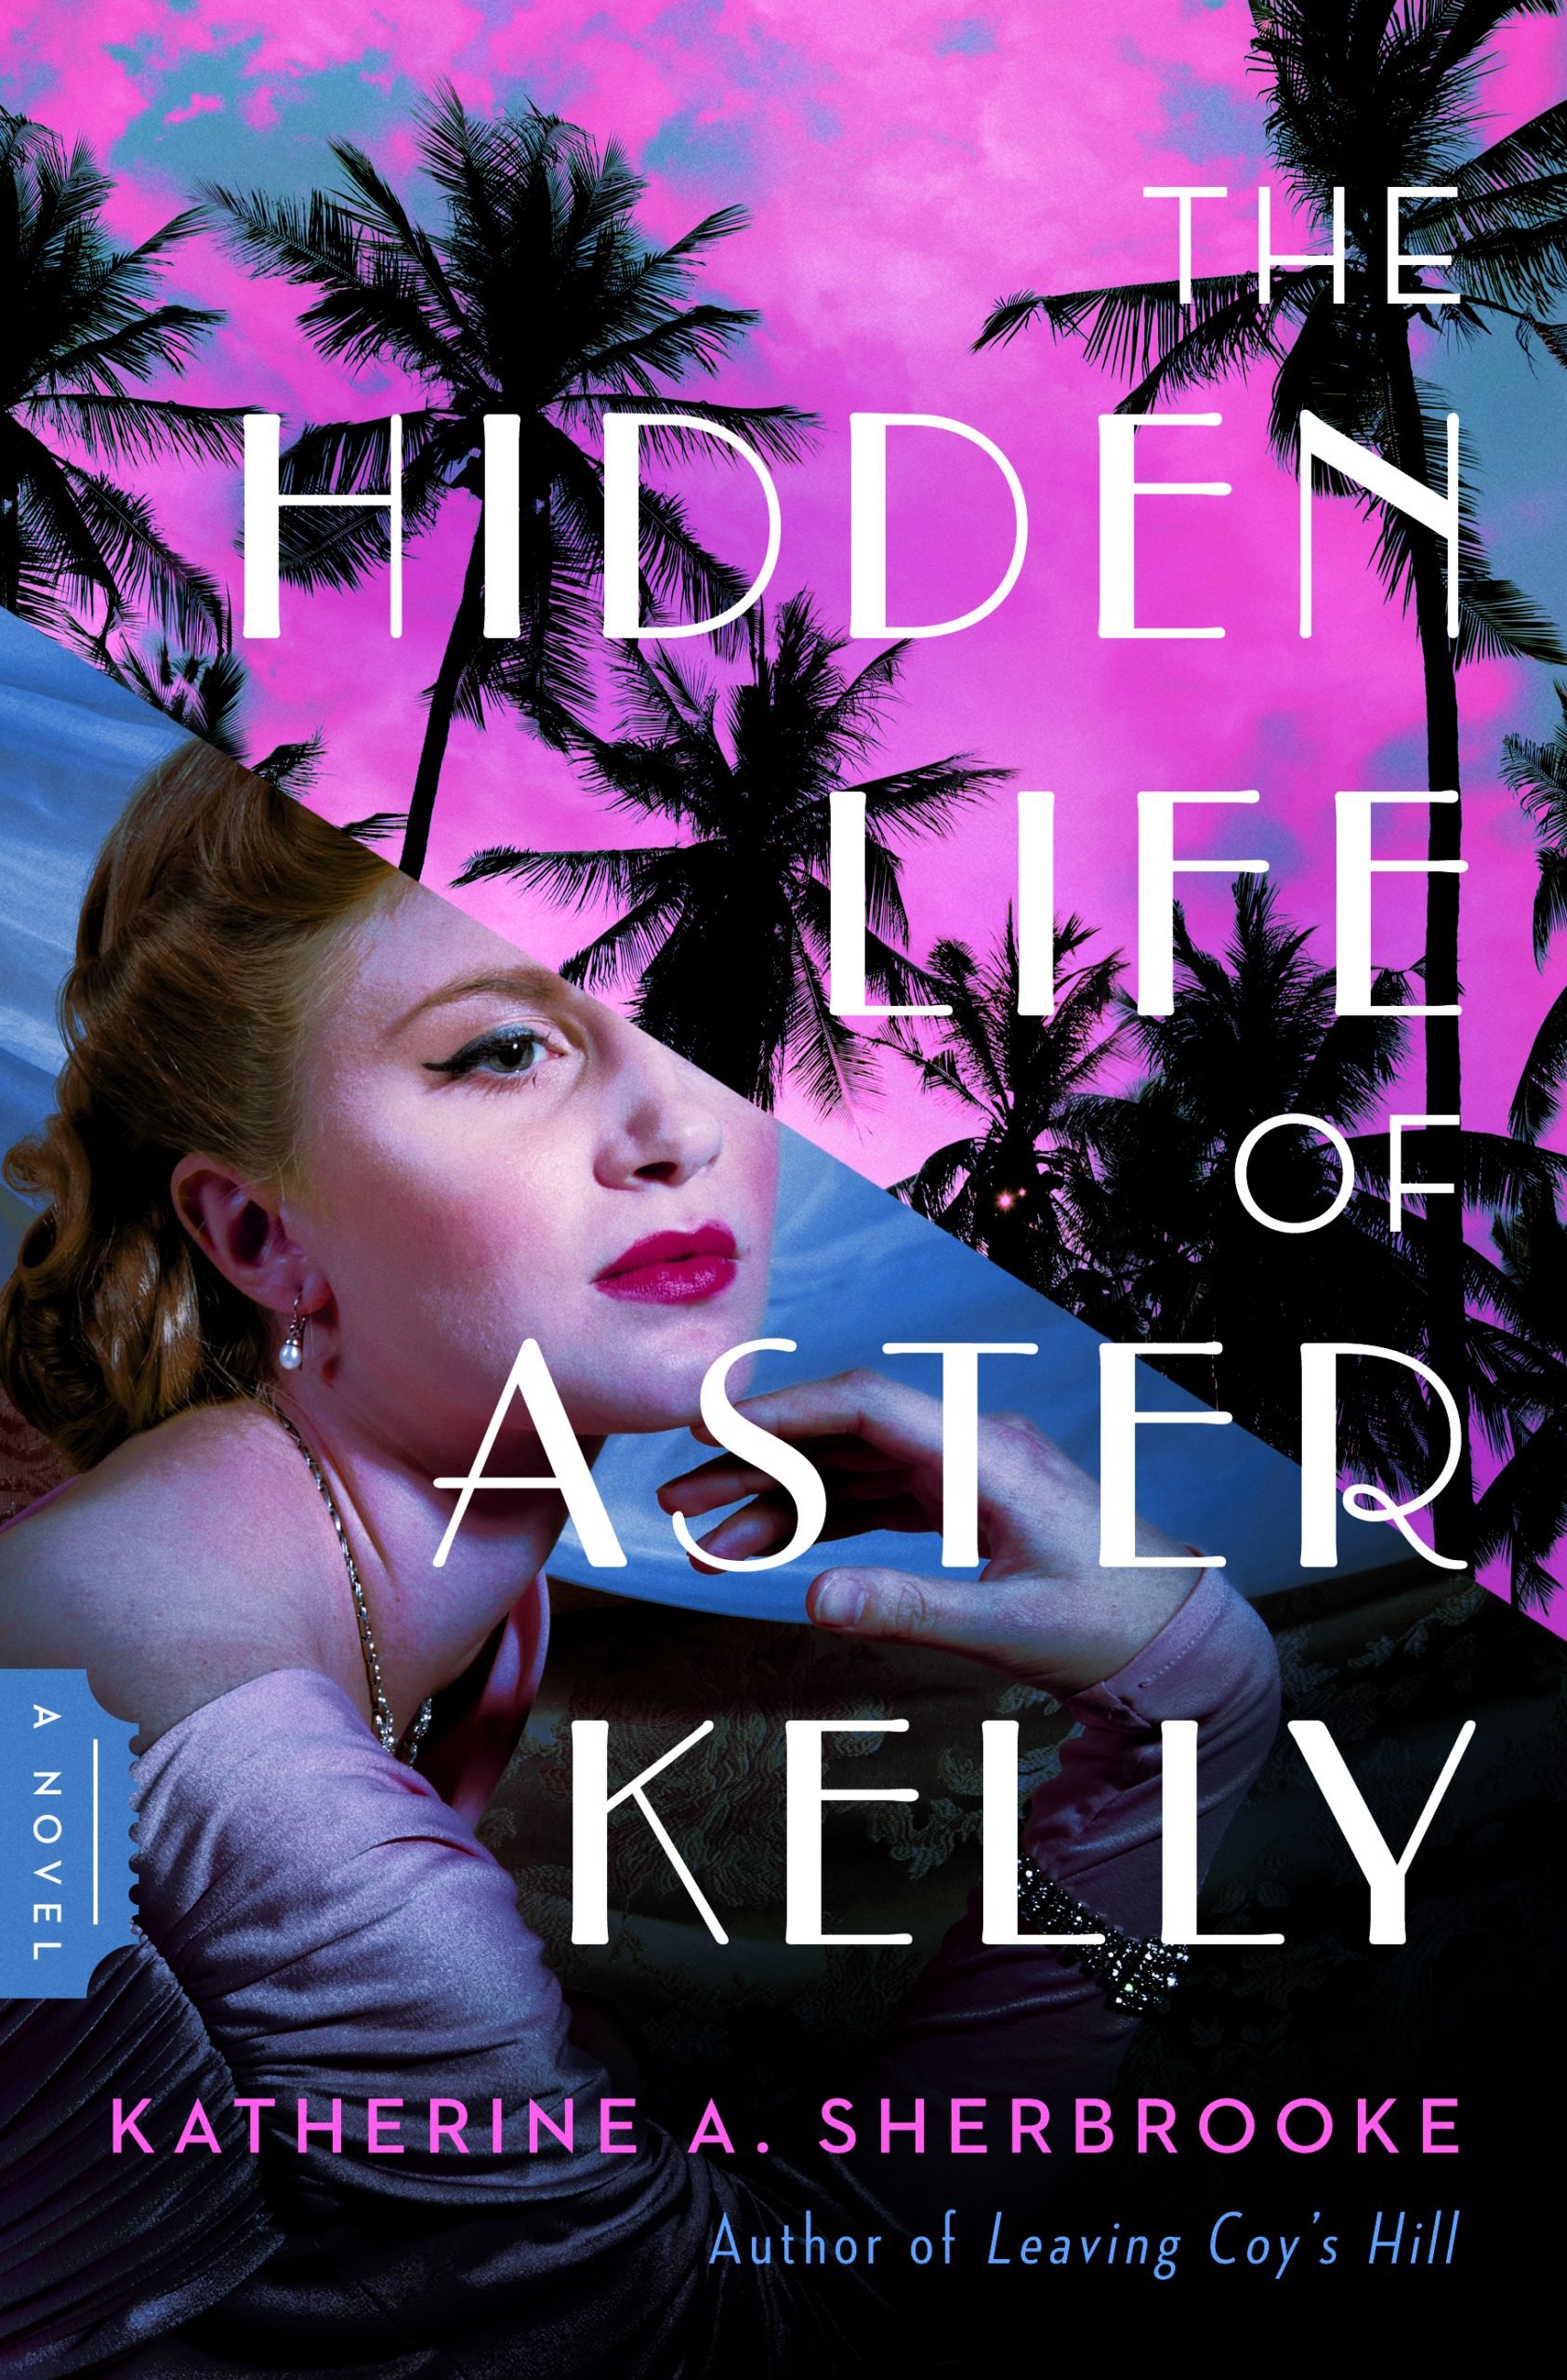 book cover of "The Hidden Life of Aster Kelly"